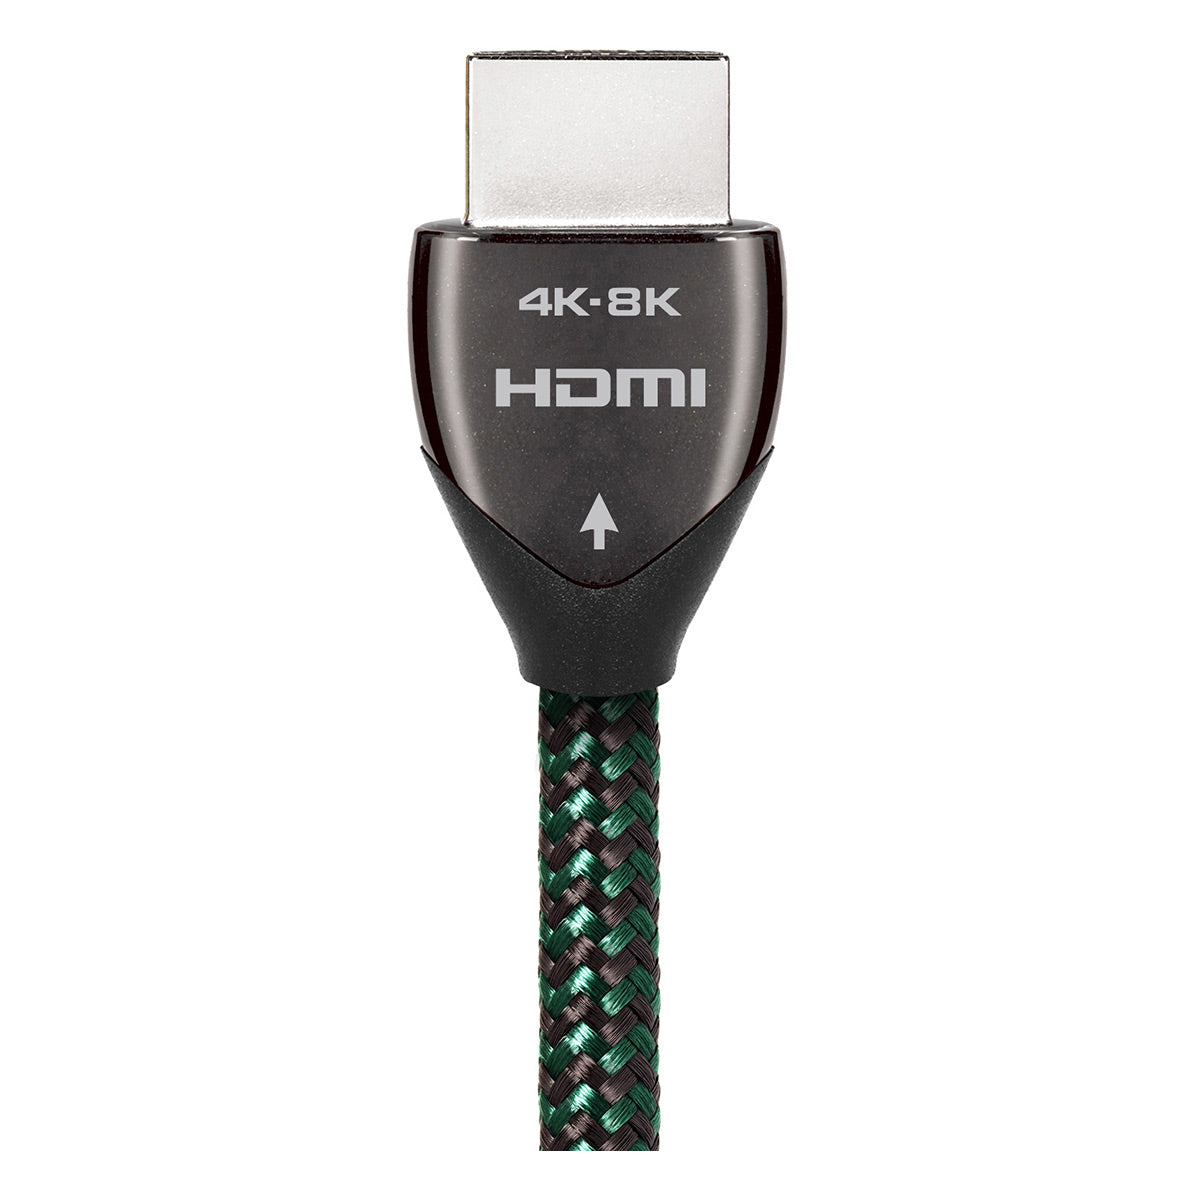 AudioQuest Photon 48 4K-8K 48Gbps Ultra High Speed HDMI Cable for Xbox - 7.38 ft. (2.25m)